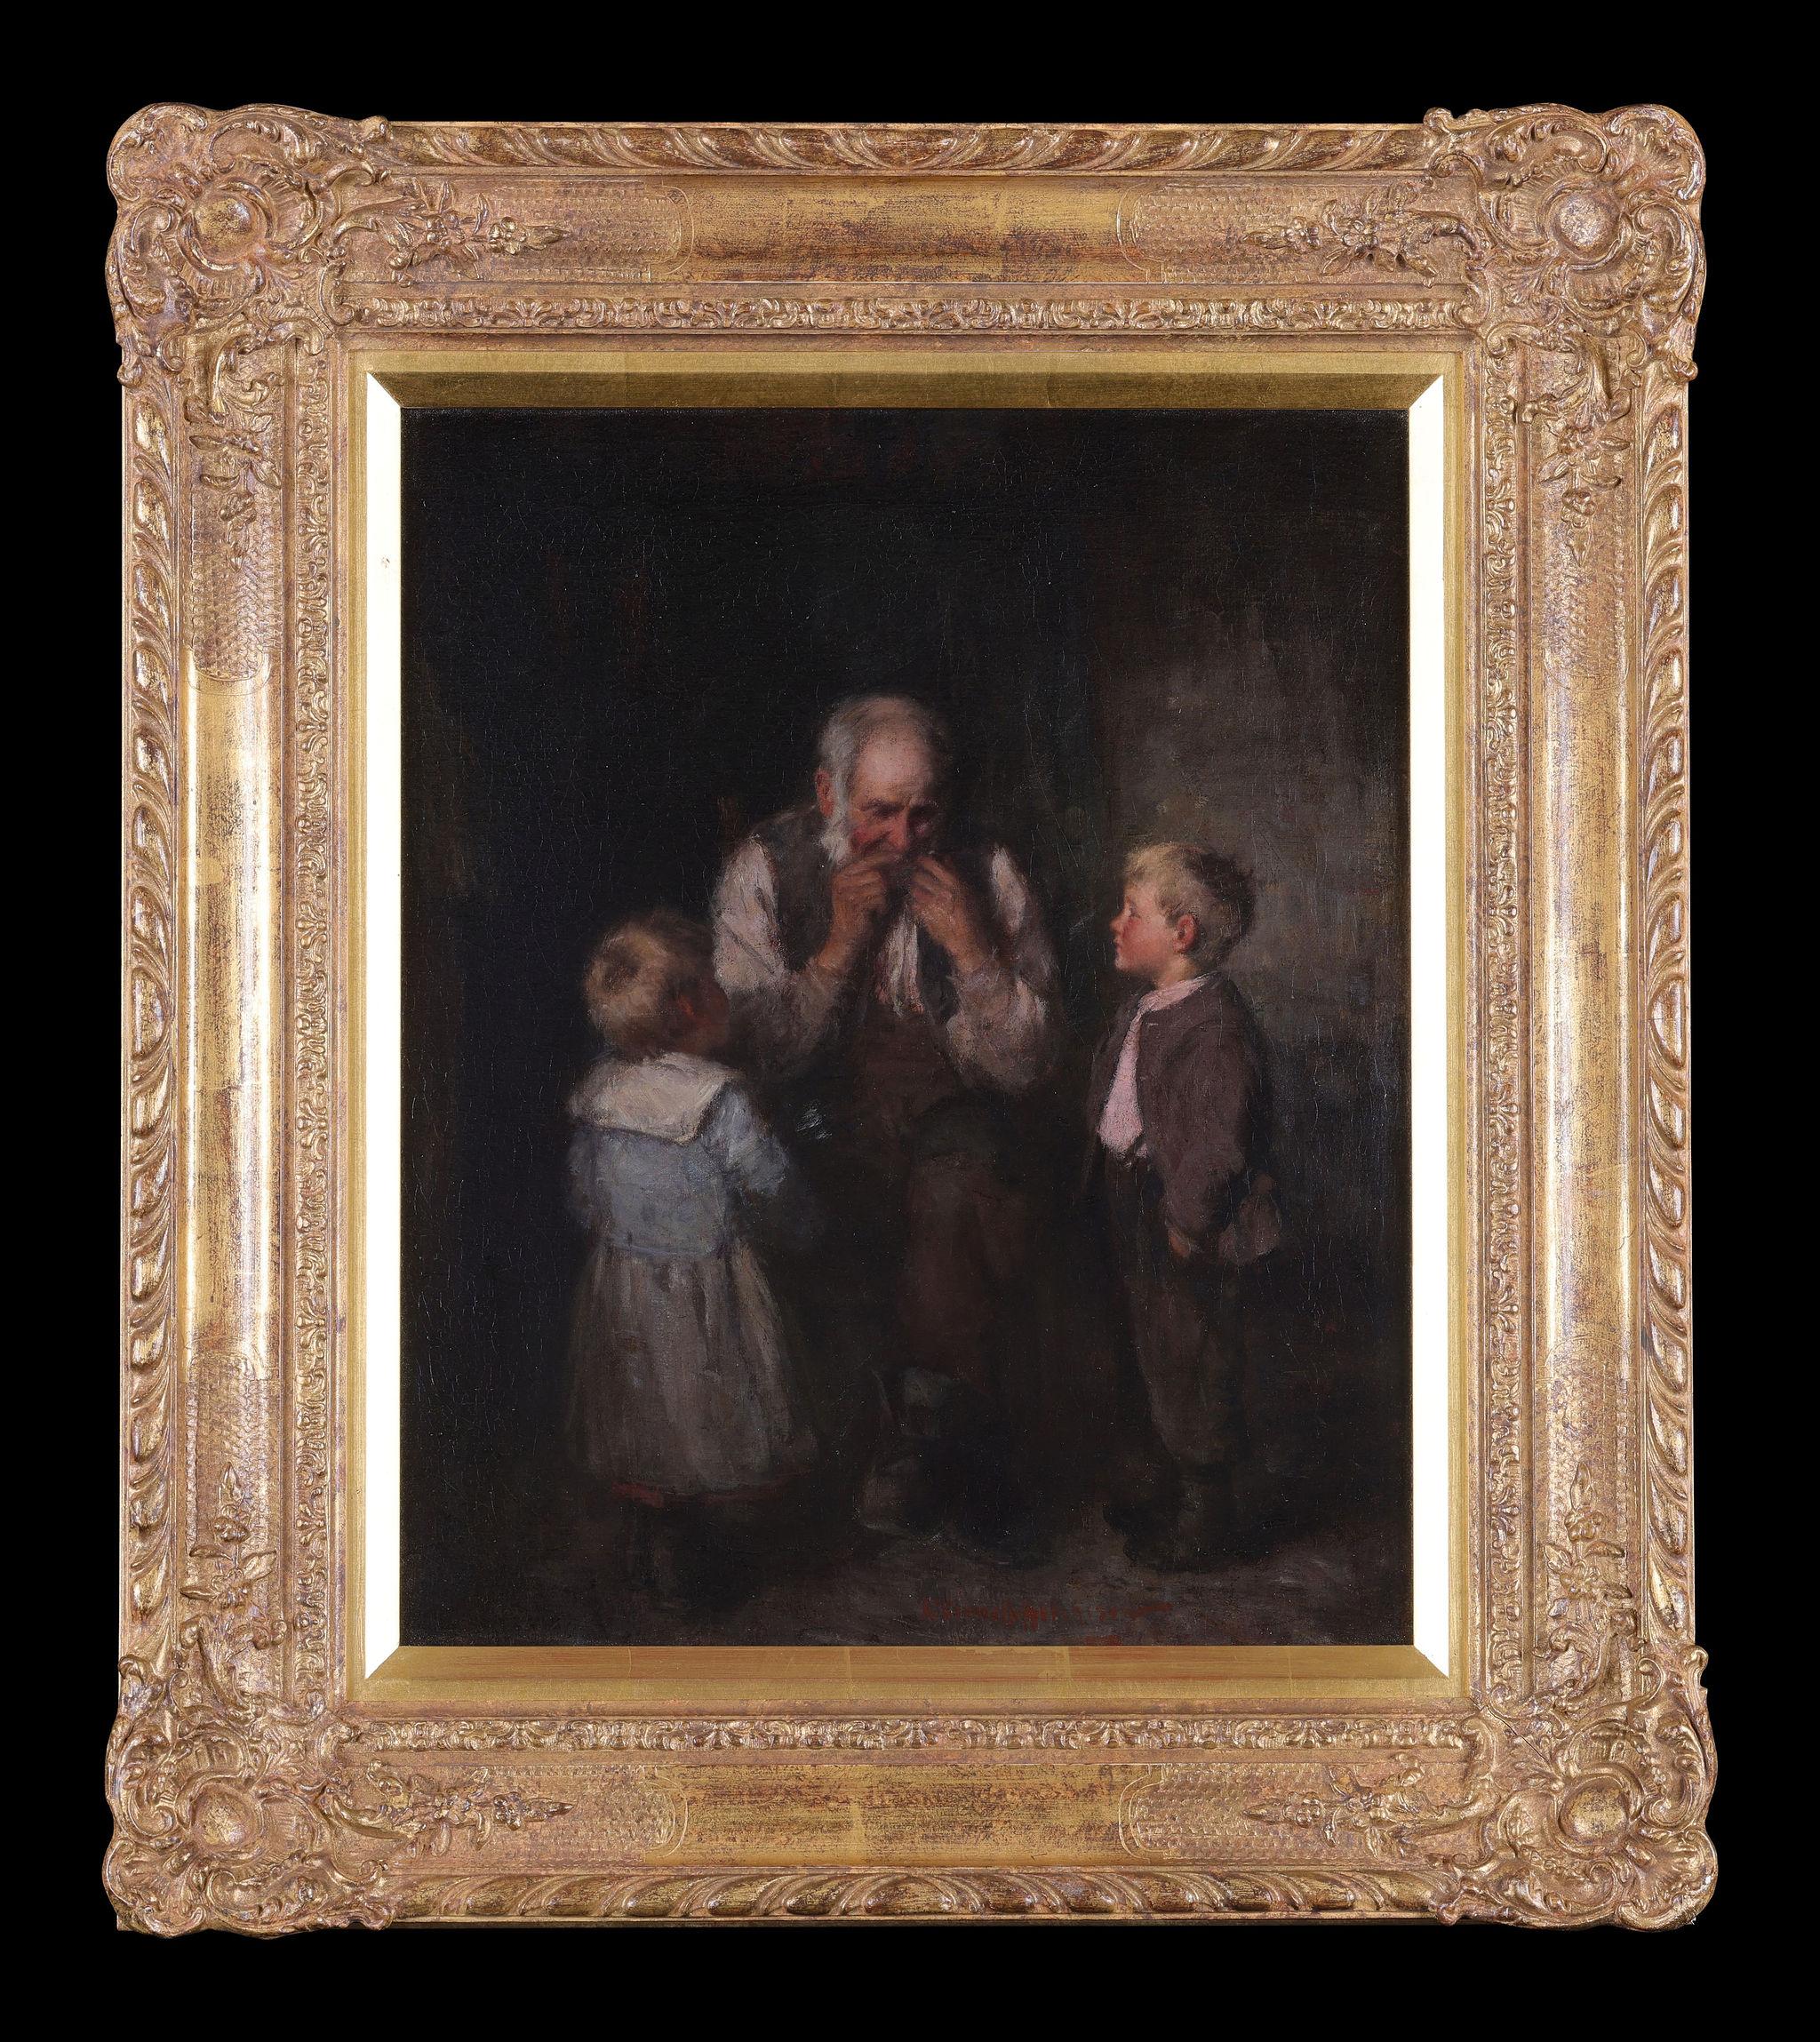 Robert Gemmell Hutchison Figurative Painting - 'The Jew's Harp' Two Boys Listening to an Old Man. An antique painting